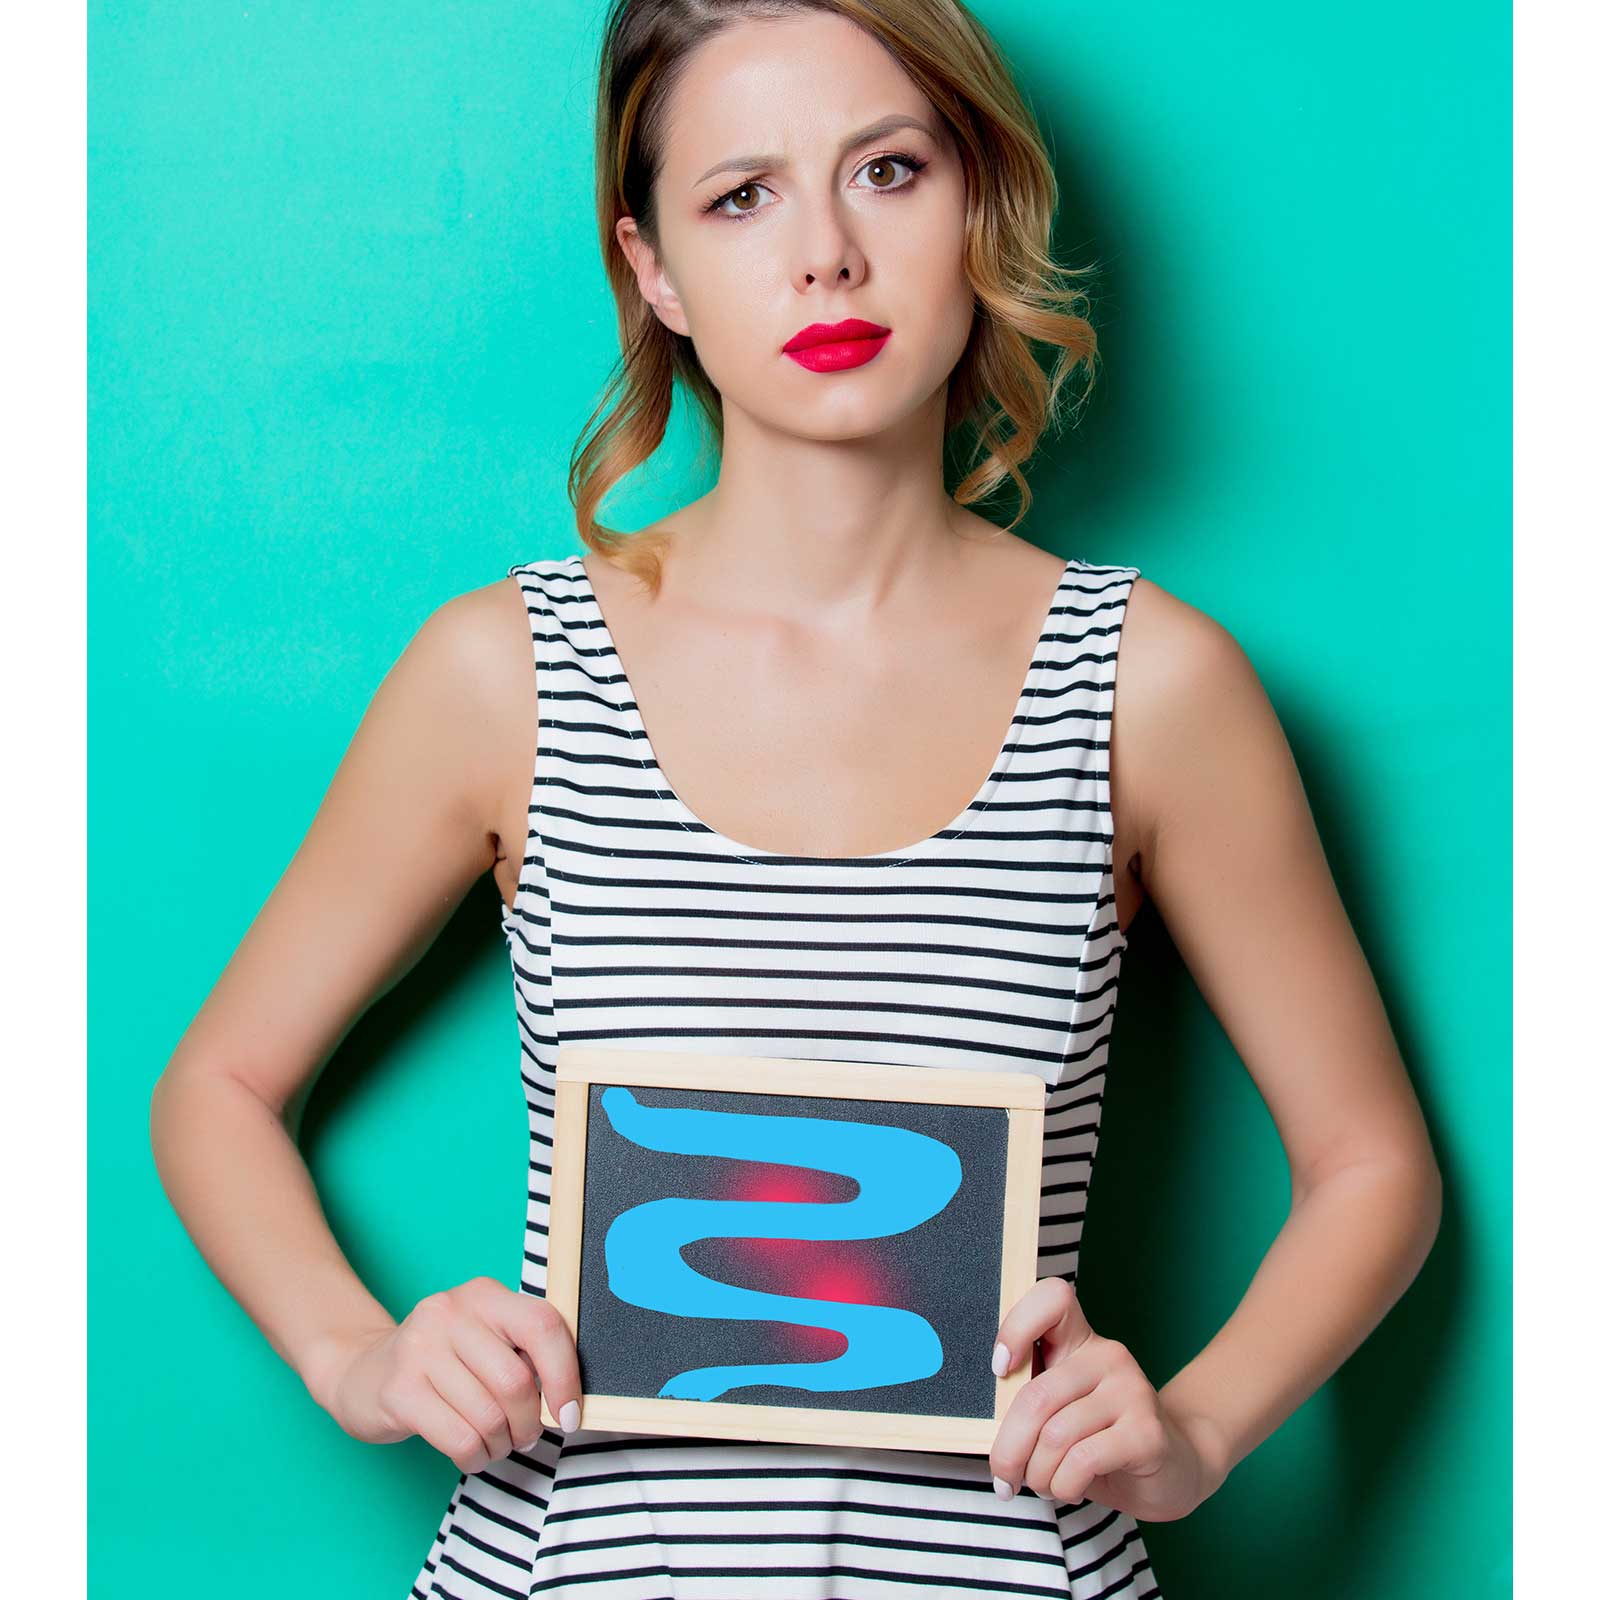 Woman in a black and white striped singlet stands in front of a teal background holding an image of an inflamed intestine.